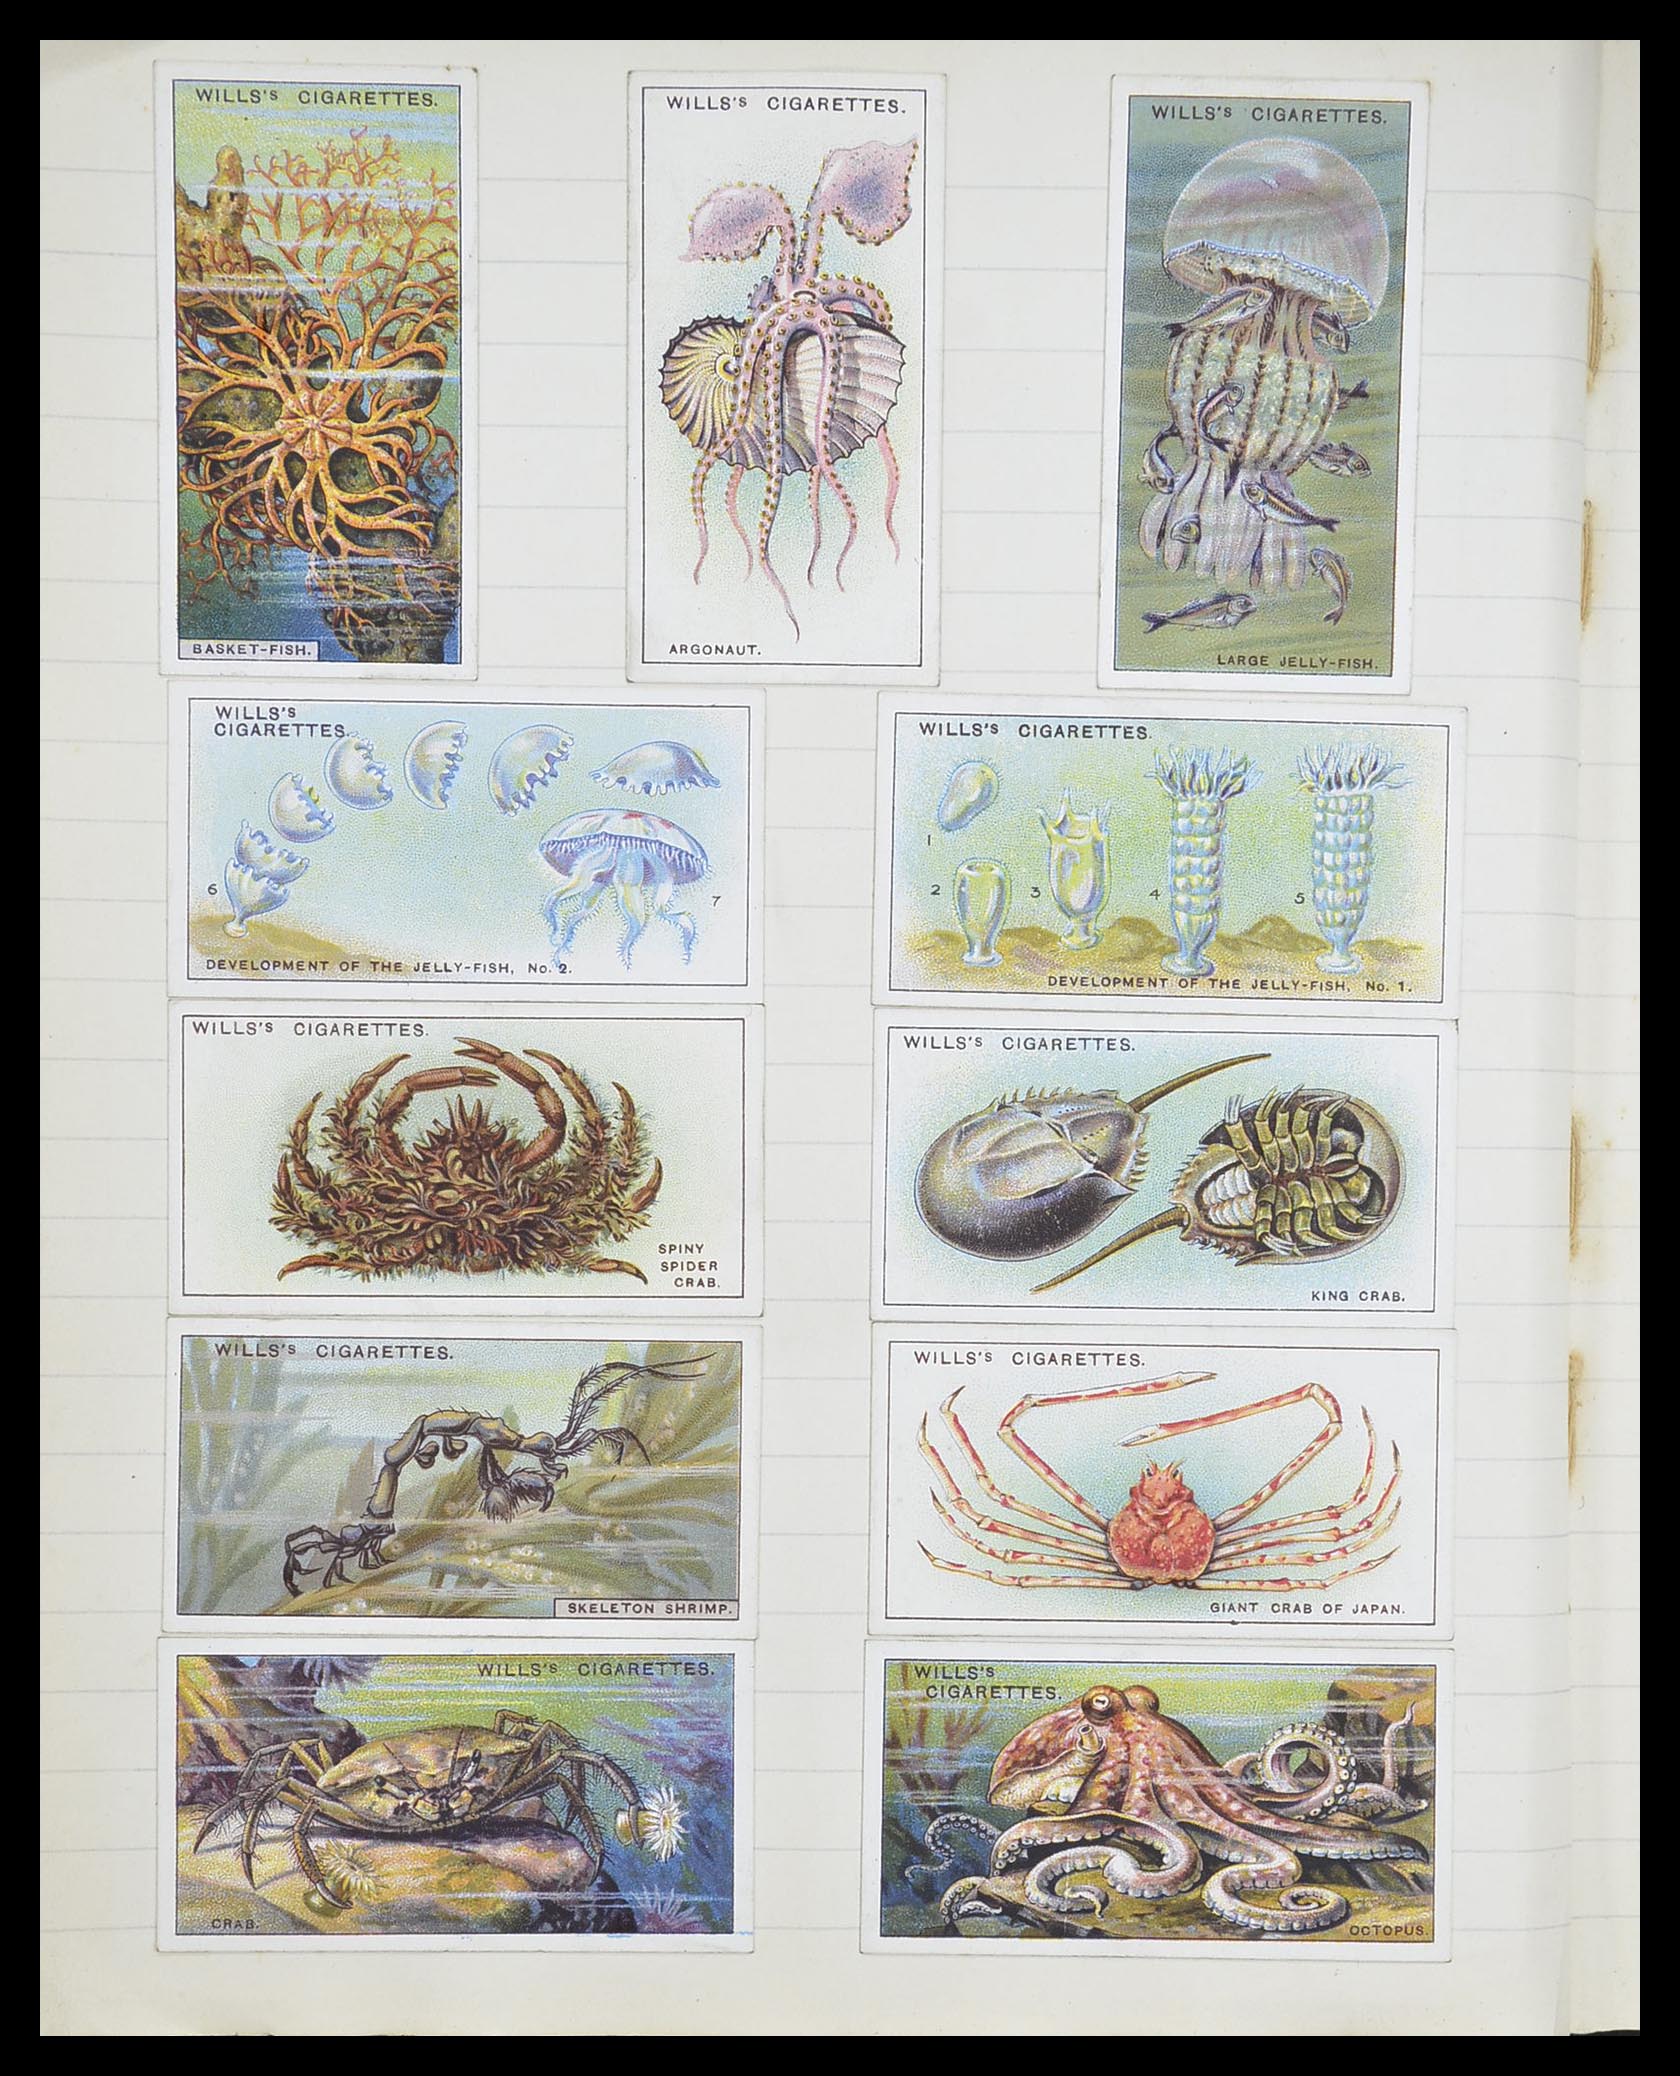 33444 094 - Stamp collection 33444 Great Britain cigarette cards.